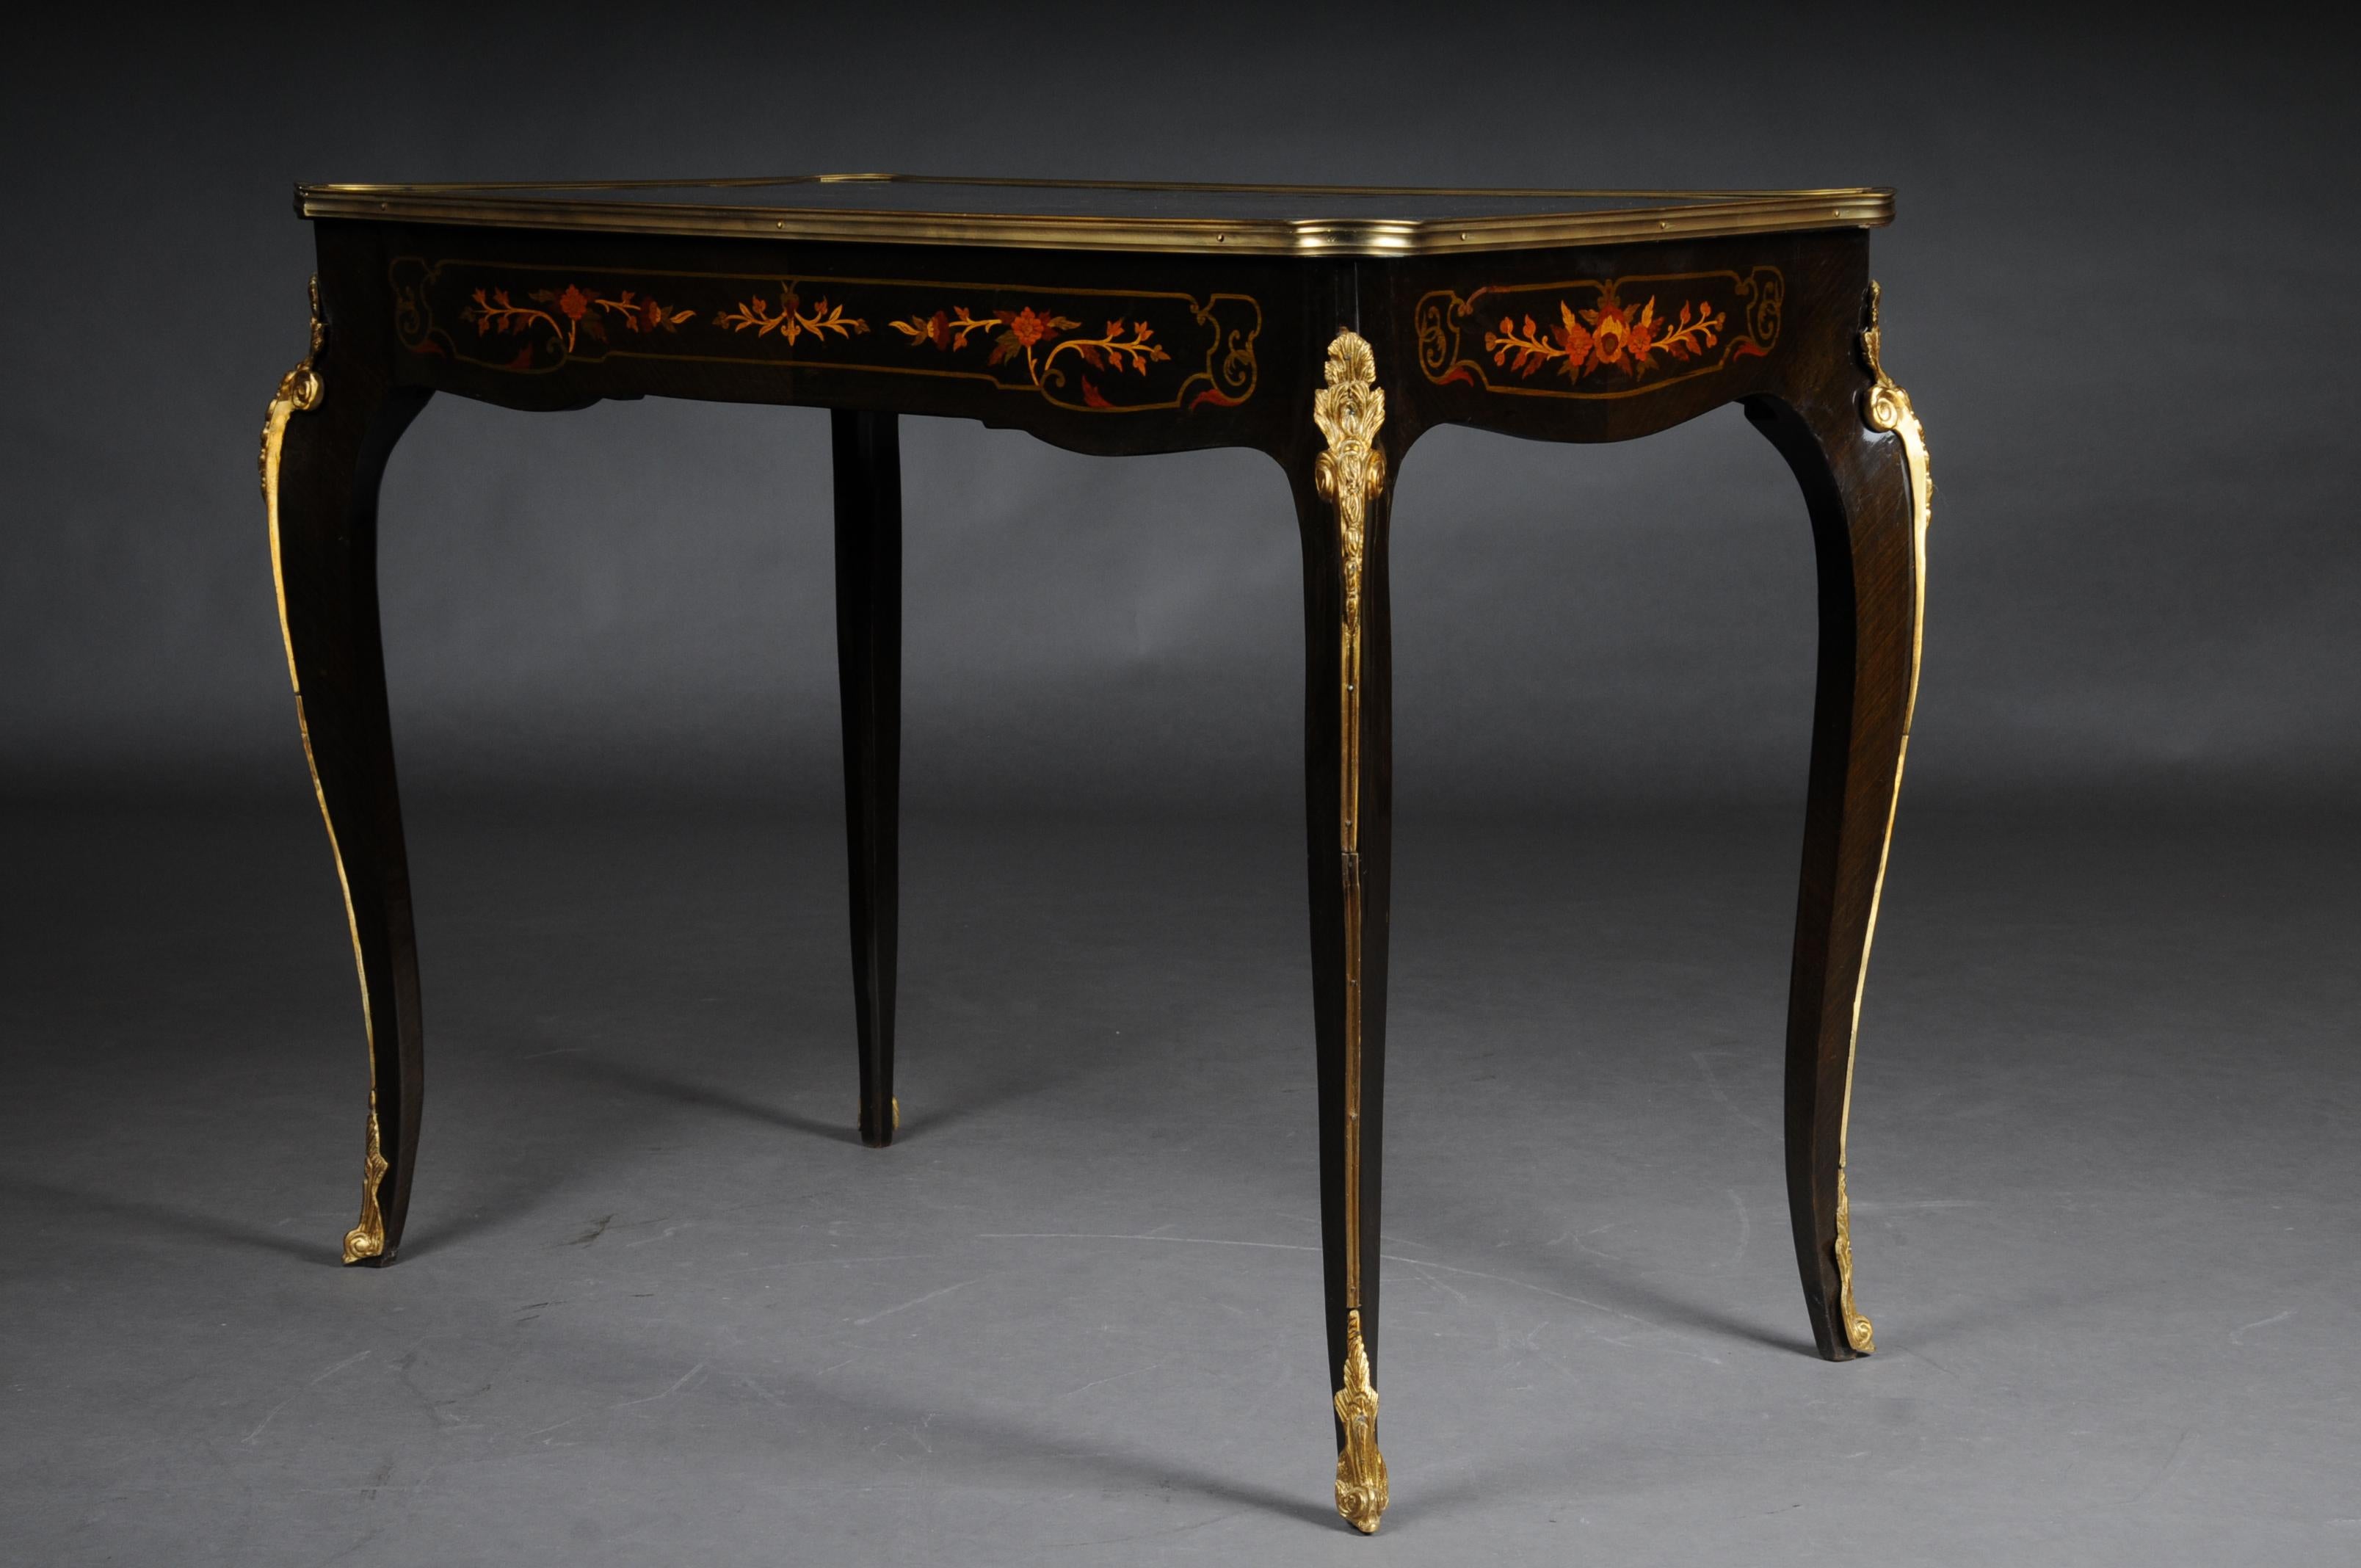 Inlay Noble Ladies Desk / Table in Louis Quinze Style, Black